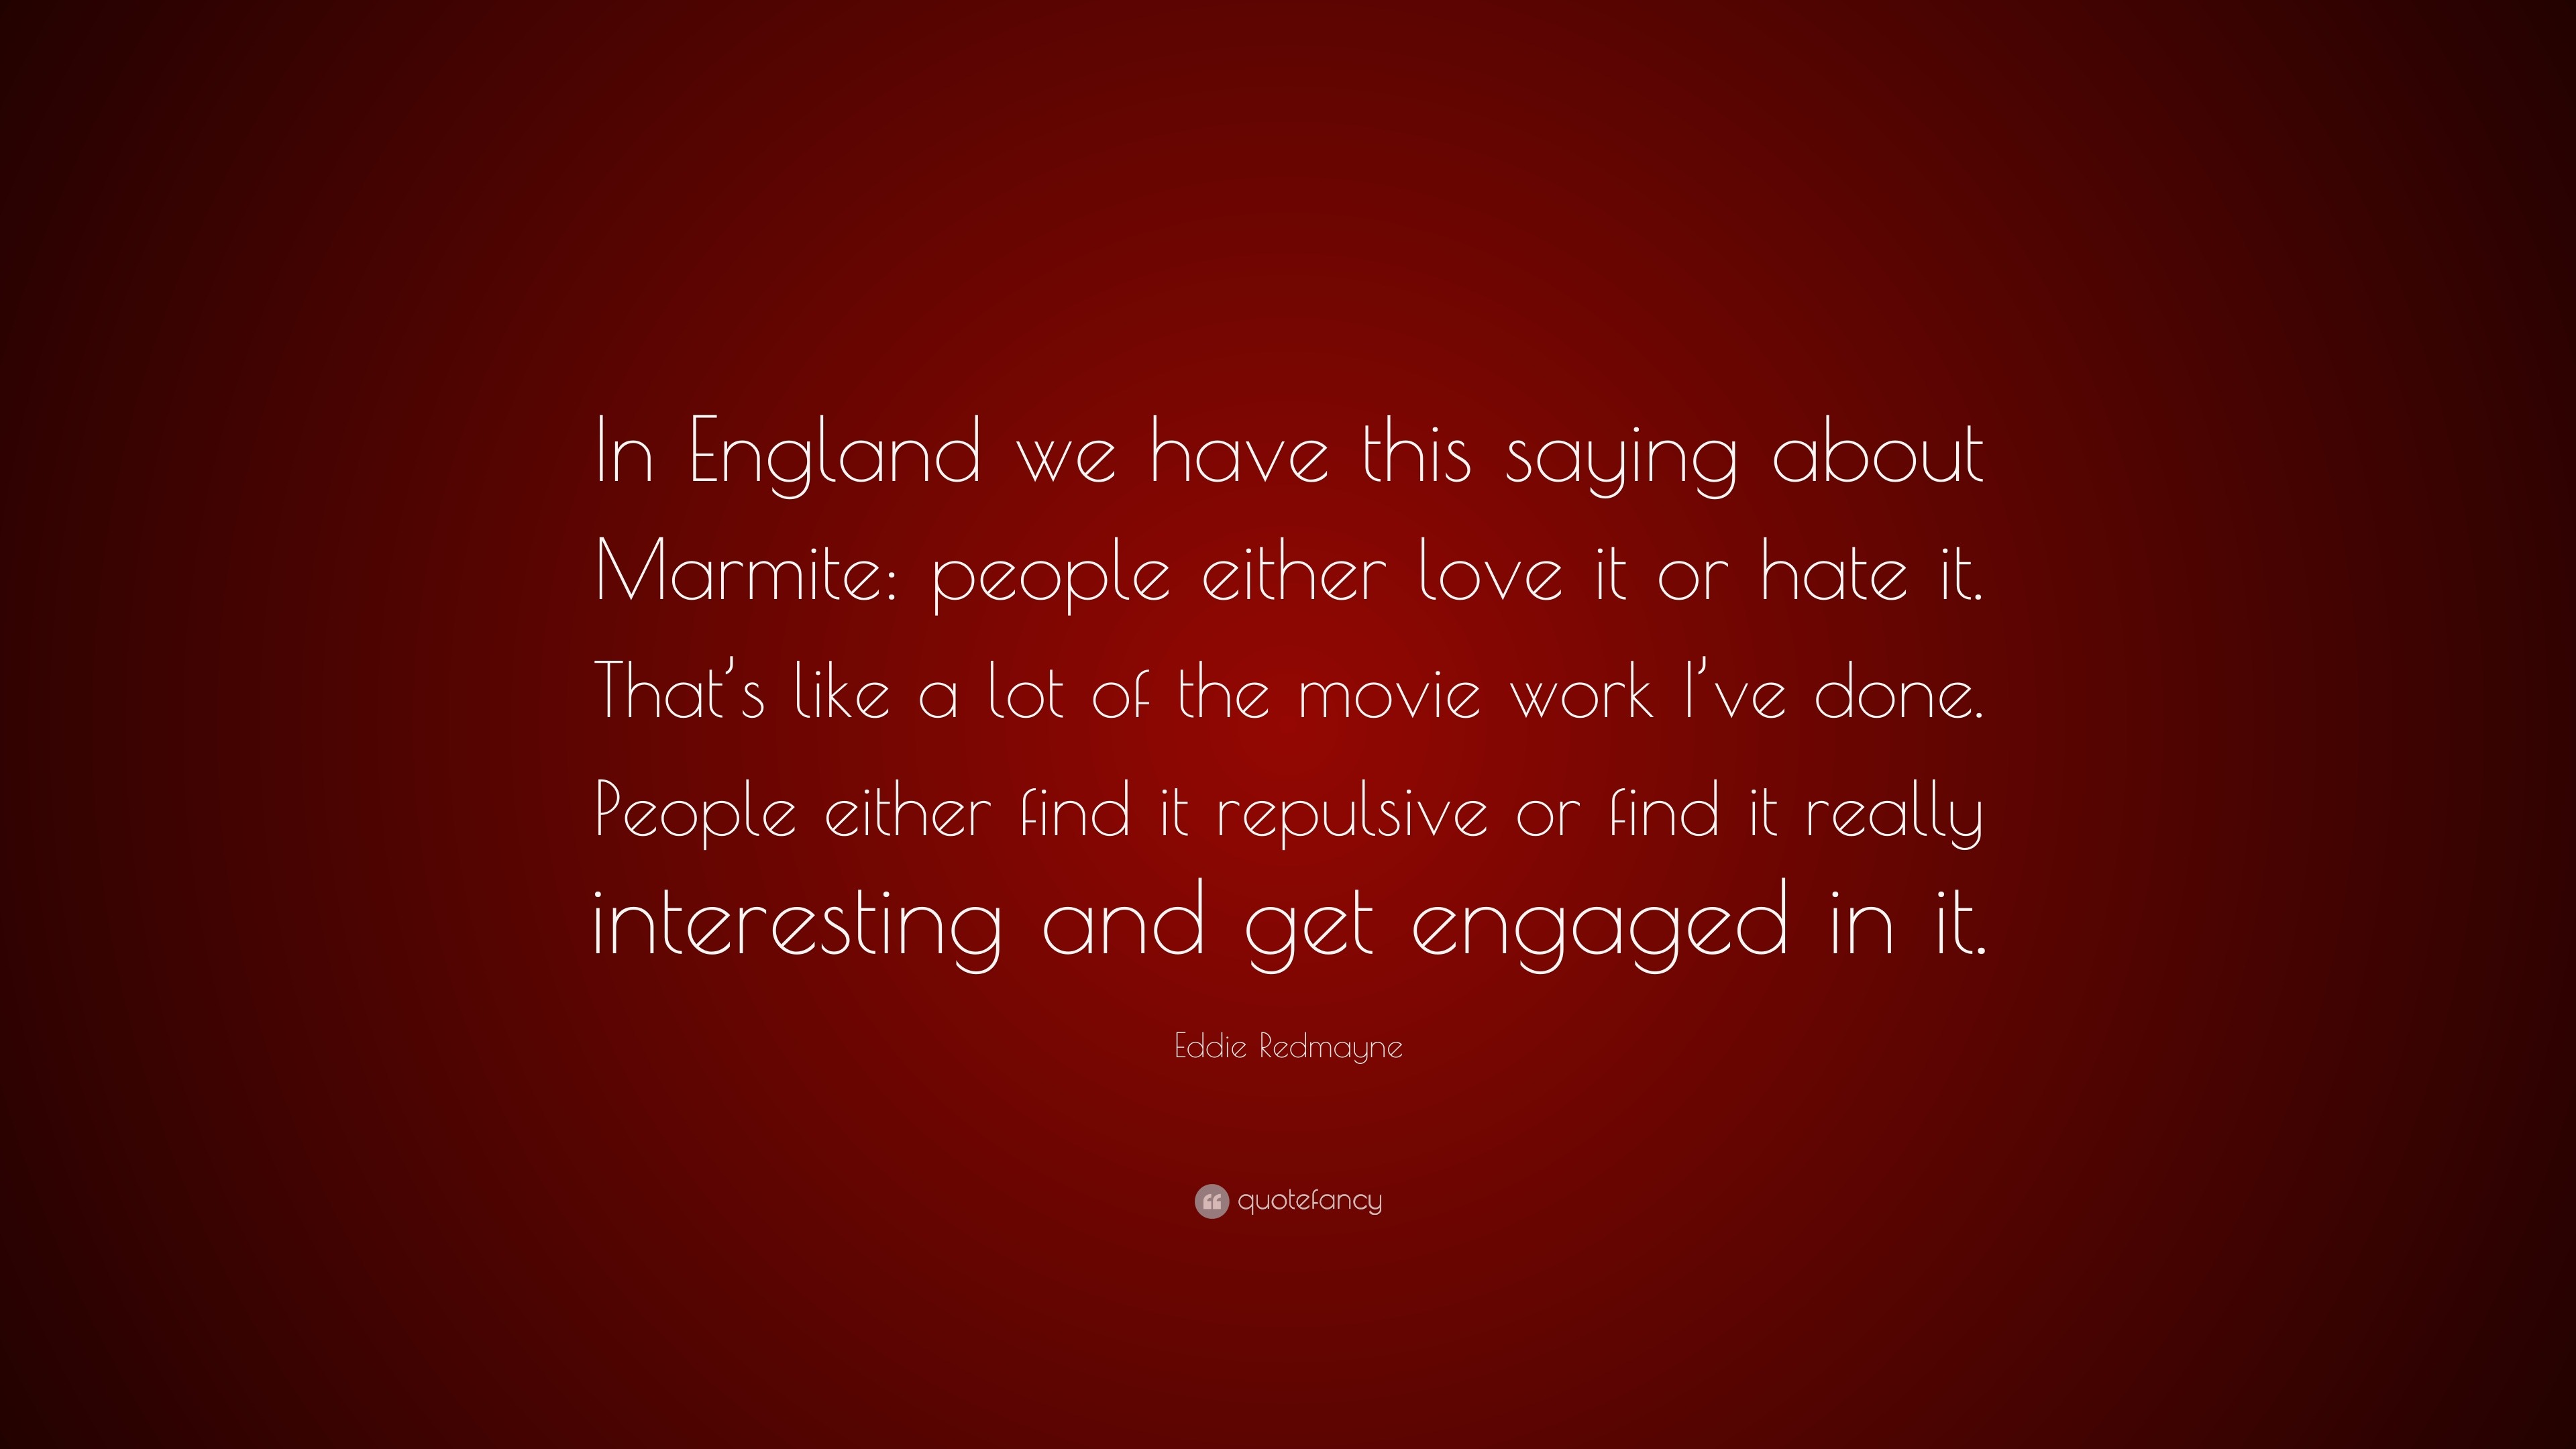 Ed Redmayne Quote “In England we have this saying about Marmite people either